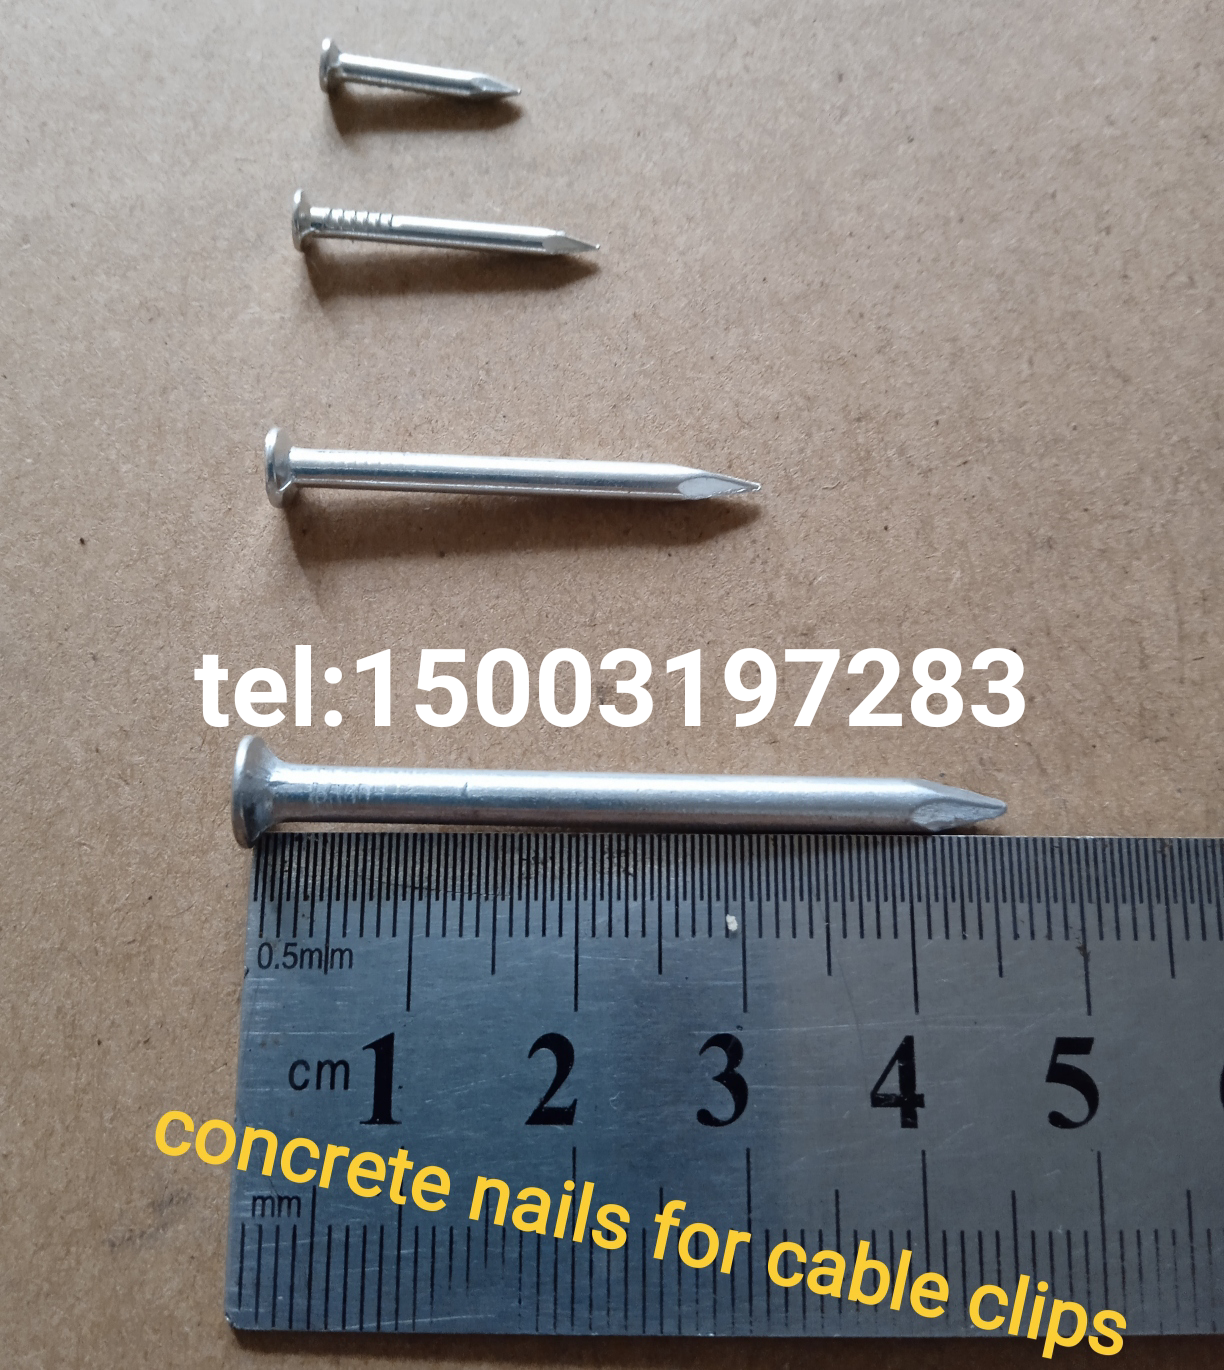 small concrete nail galvanised steel concrete nail wire clip nail pipe clip nail hardened nails for cable clip